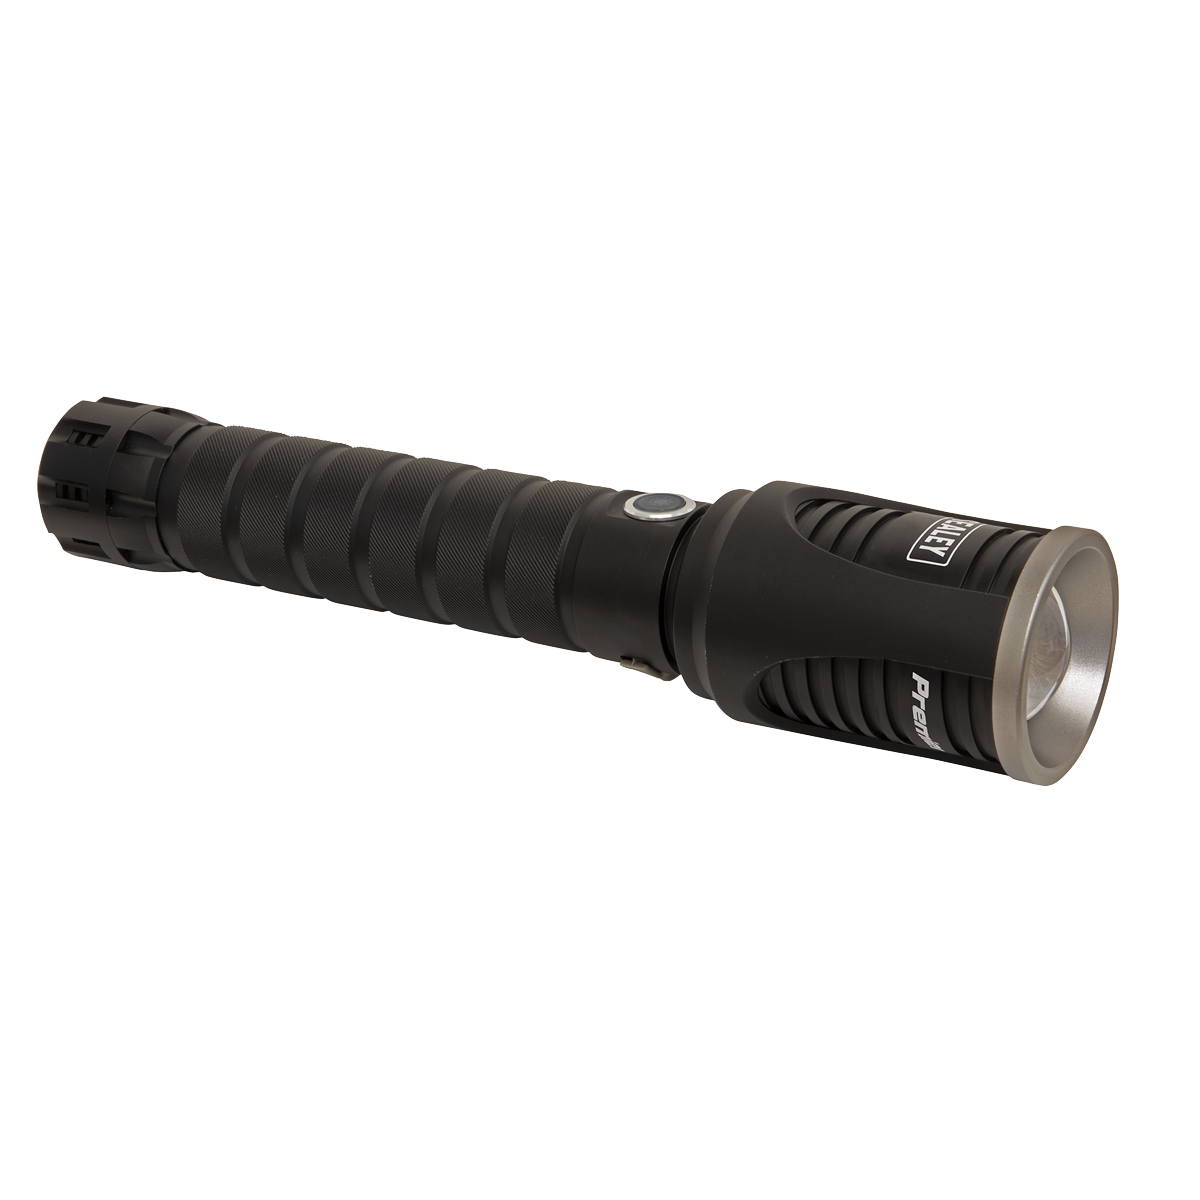 Sealey Aluminium Torch 60W COB LED Adjustable Focus Rechargeable with USB Port